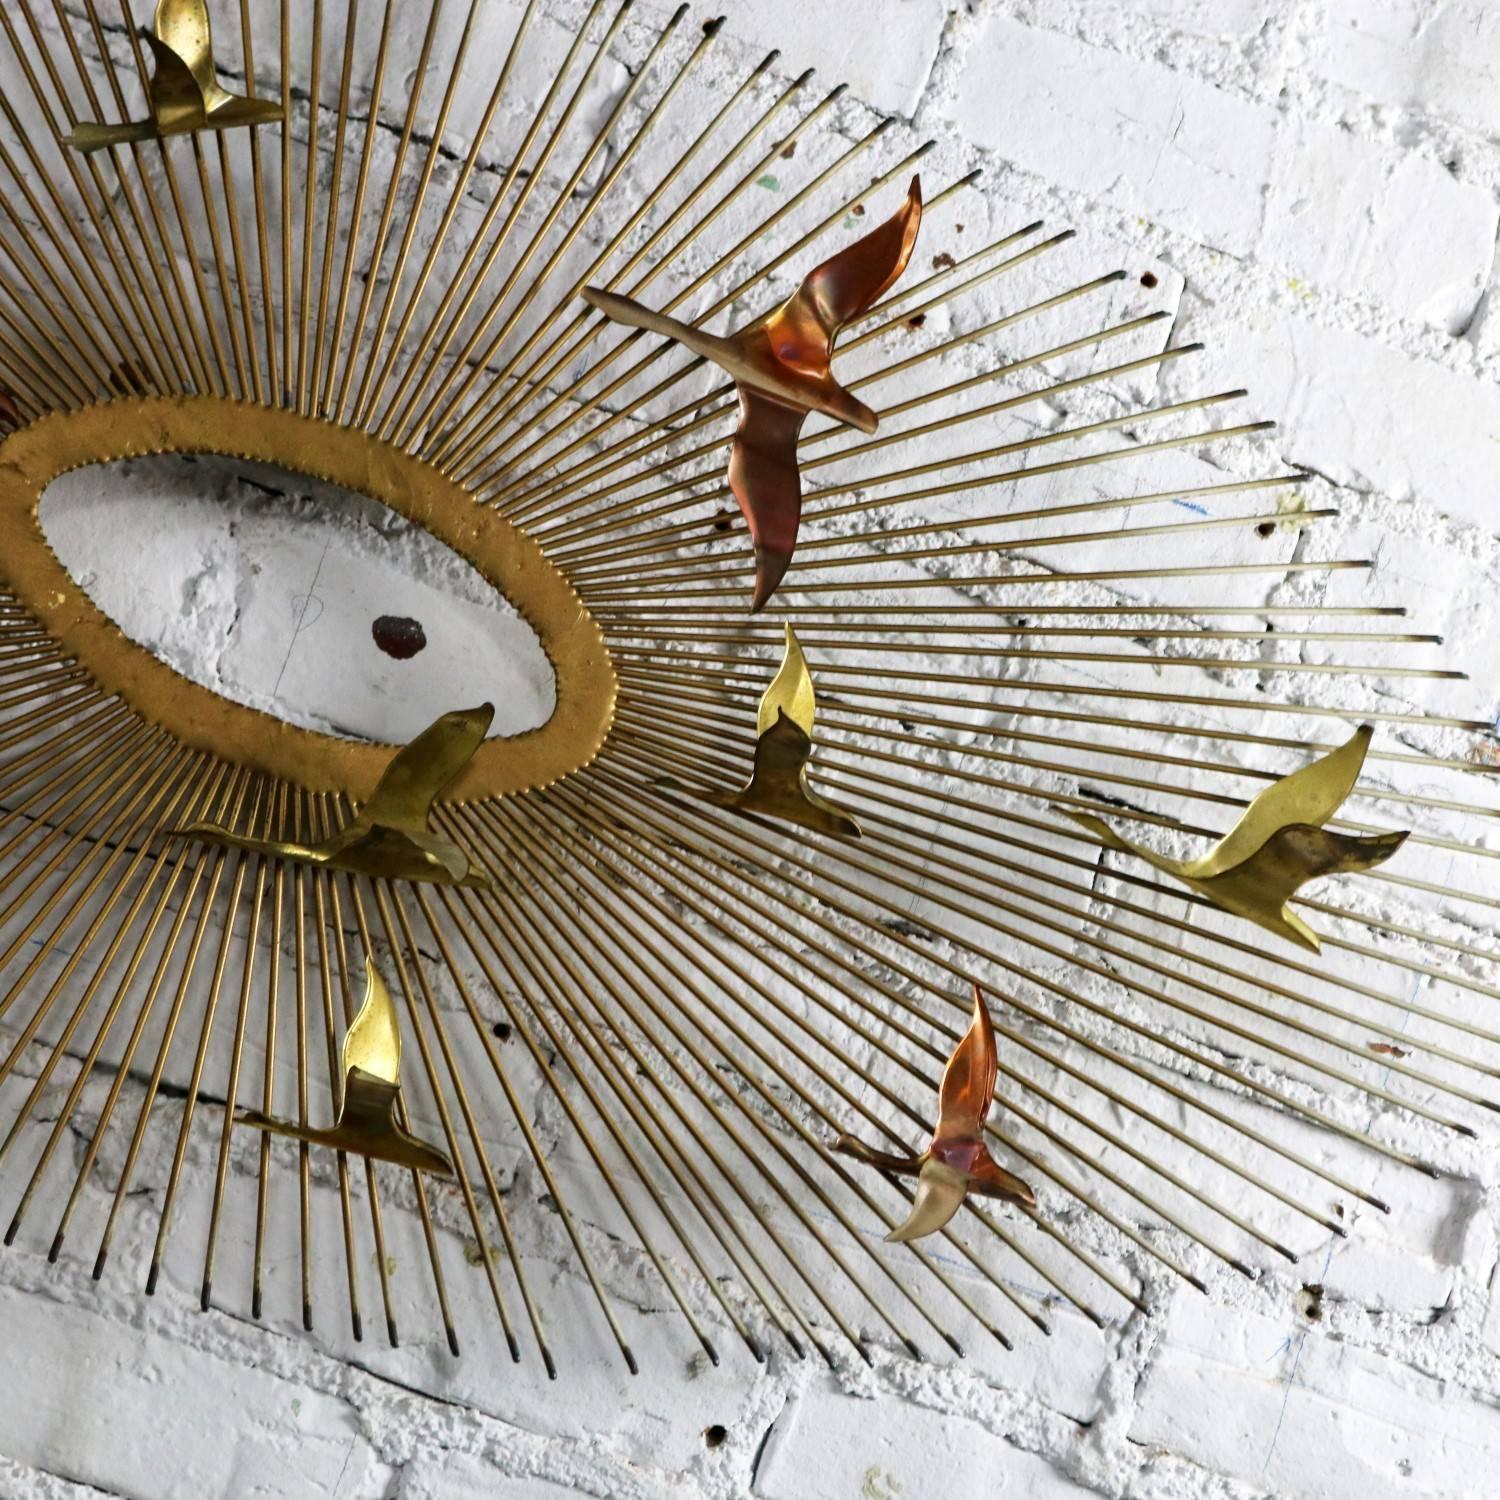 American Mid-Century Modern Oval Sunburst and Bird Wall Sculpture Attributed to C. Jere